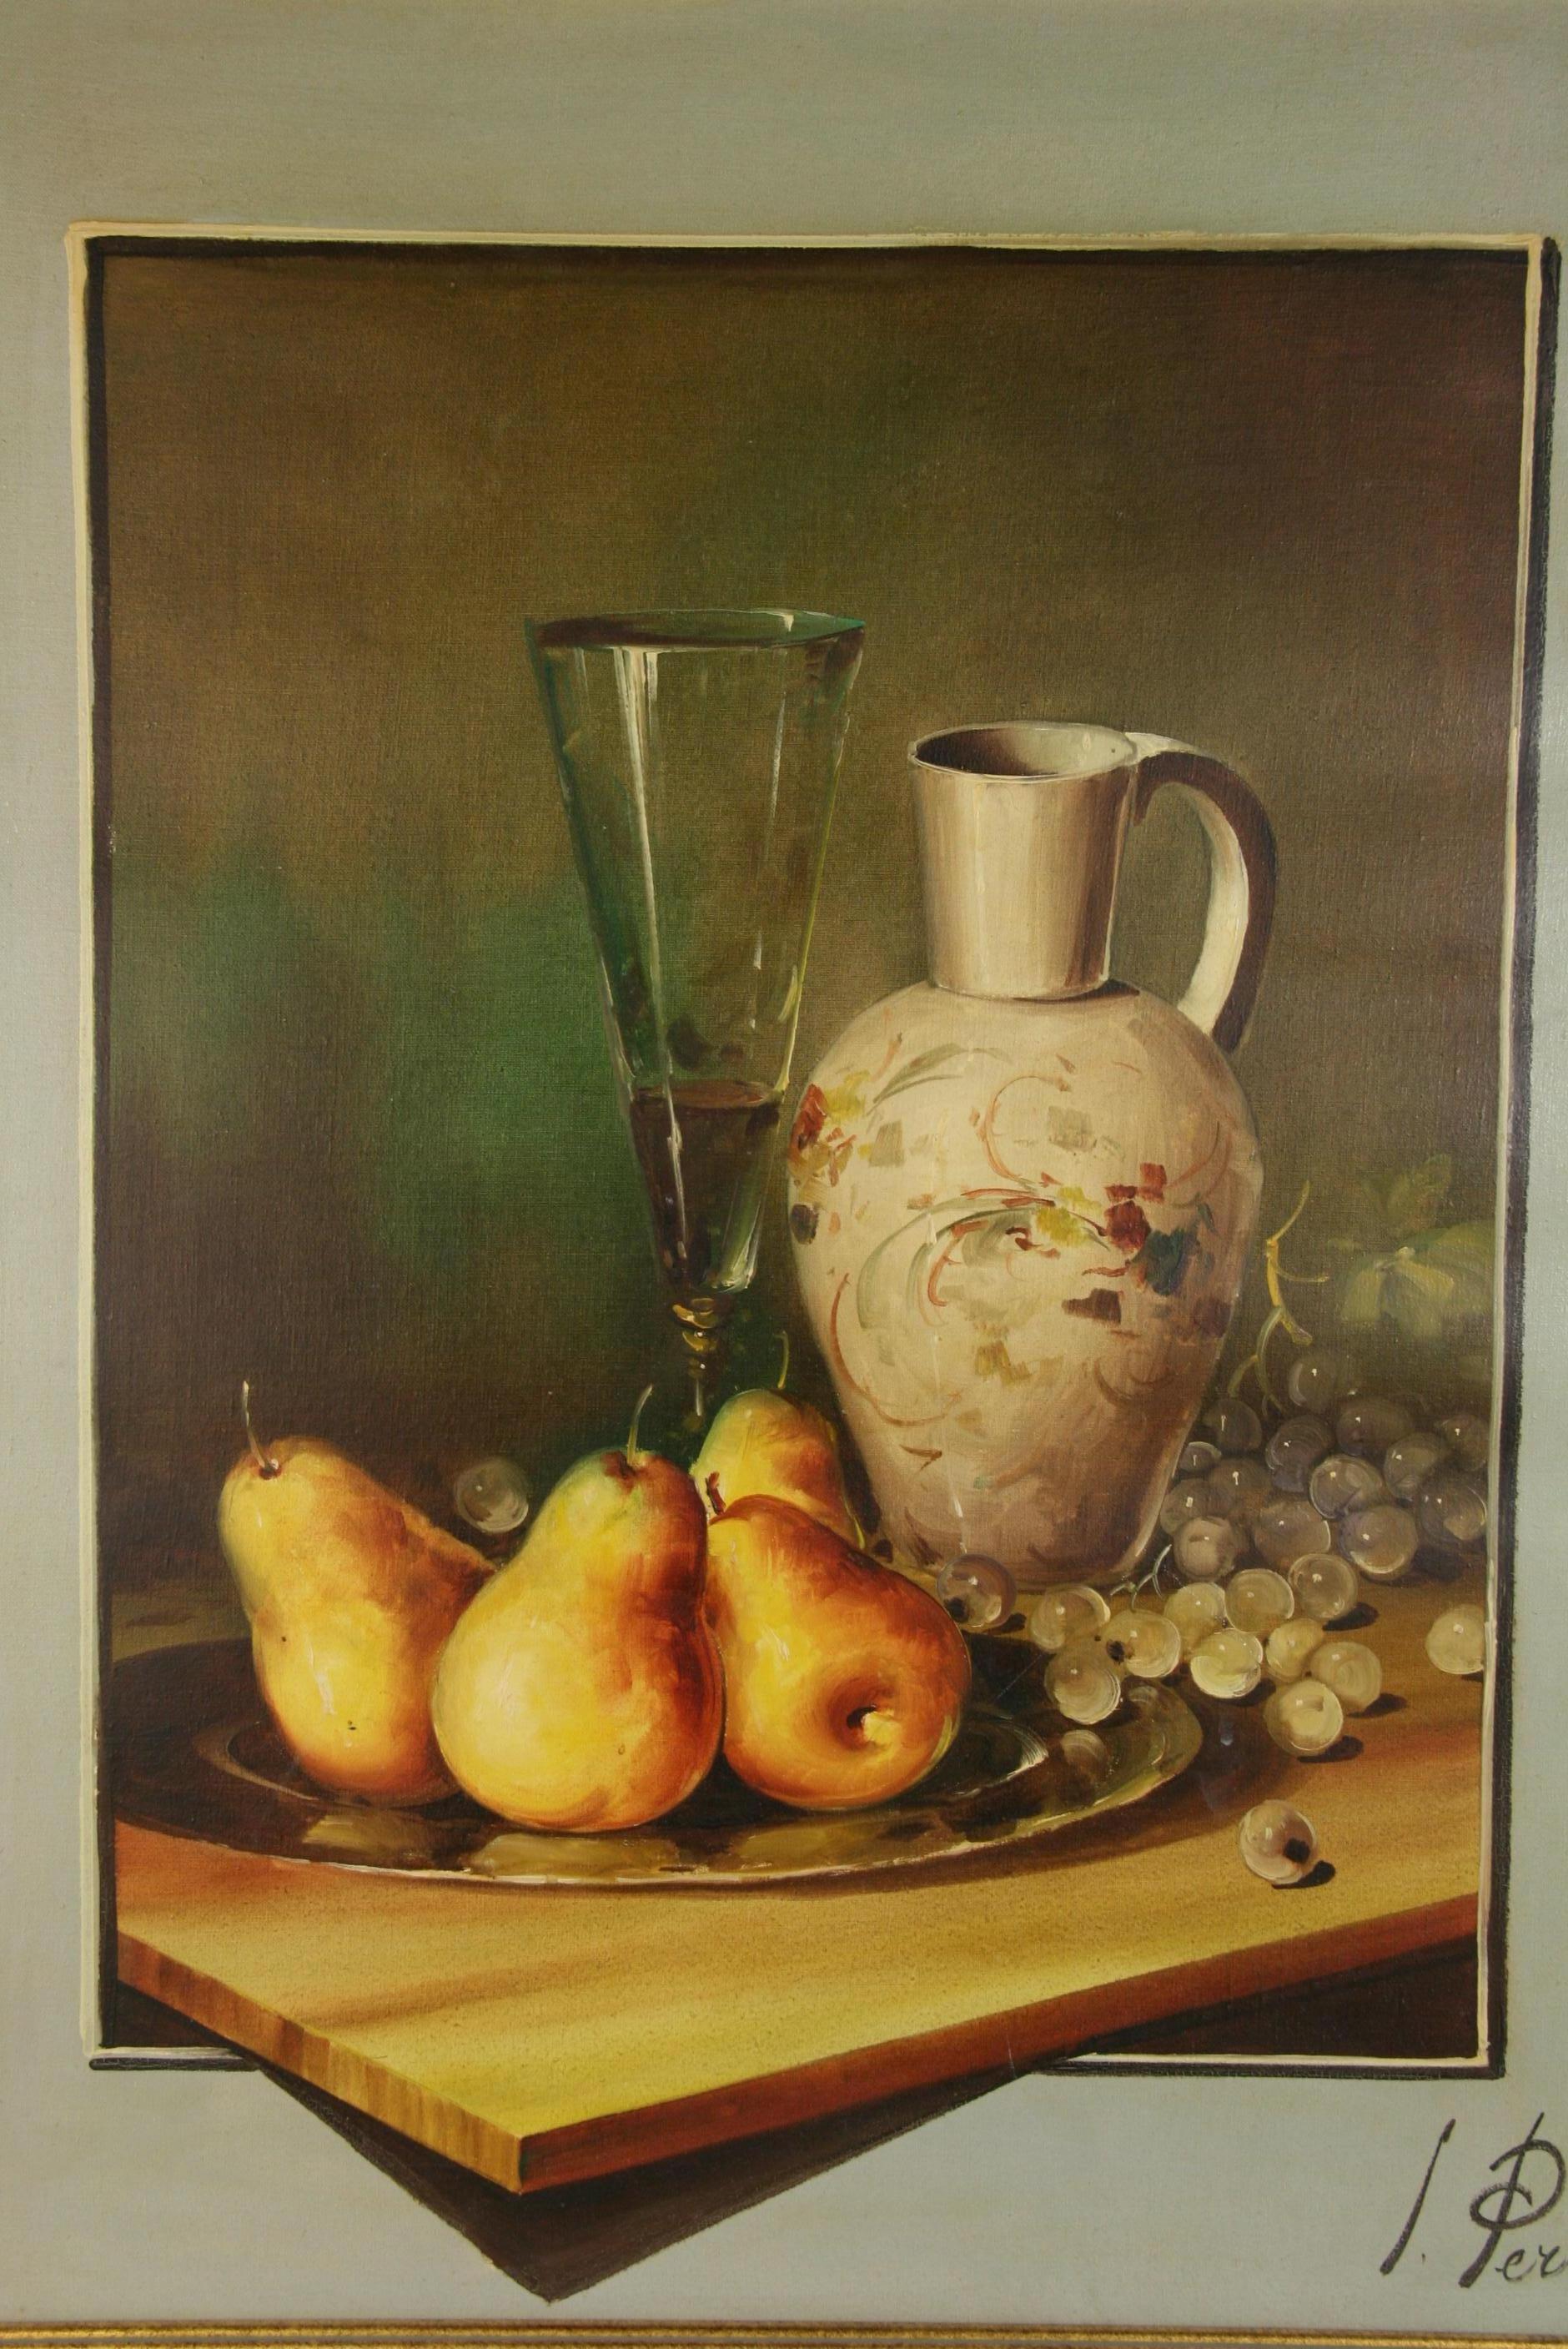 Impressionist Still Life with Pears and Grapes - Painting by L.Perrier